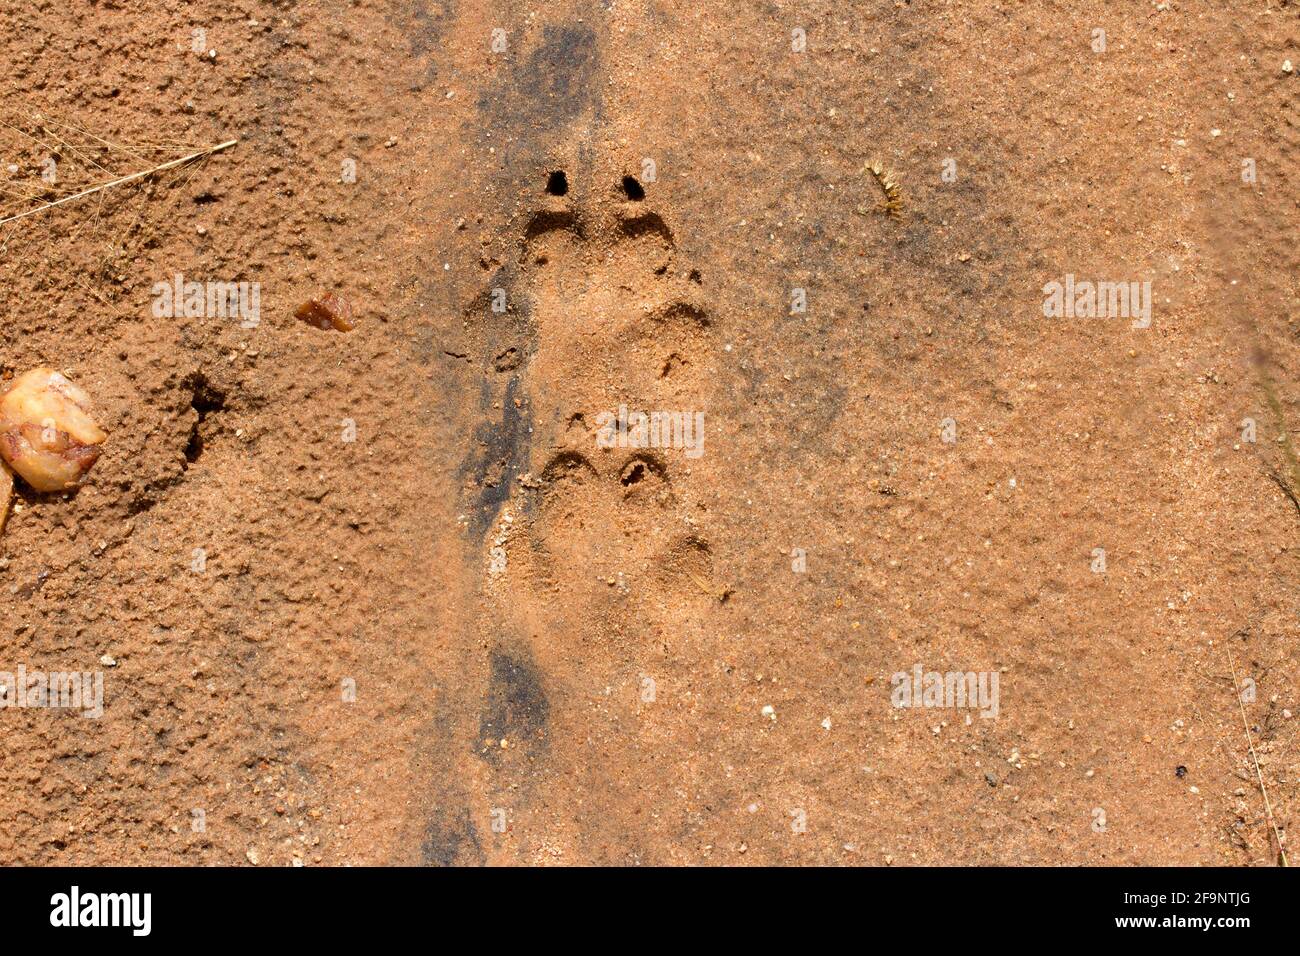 The distinctive tracks, or spoor, of a Cape Hunting Dog, that trotted through camp during night after a shower of rain ensured crisp imprints. Stock Photo